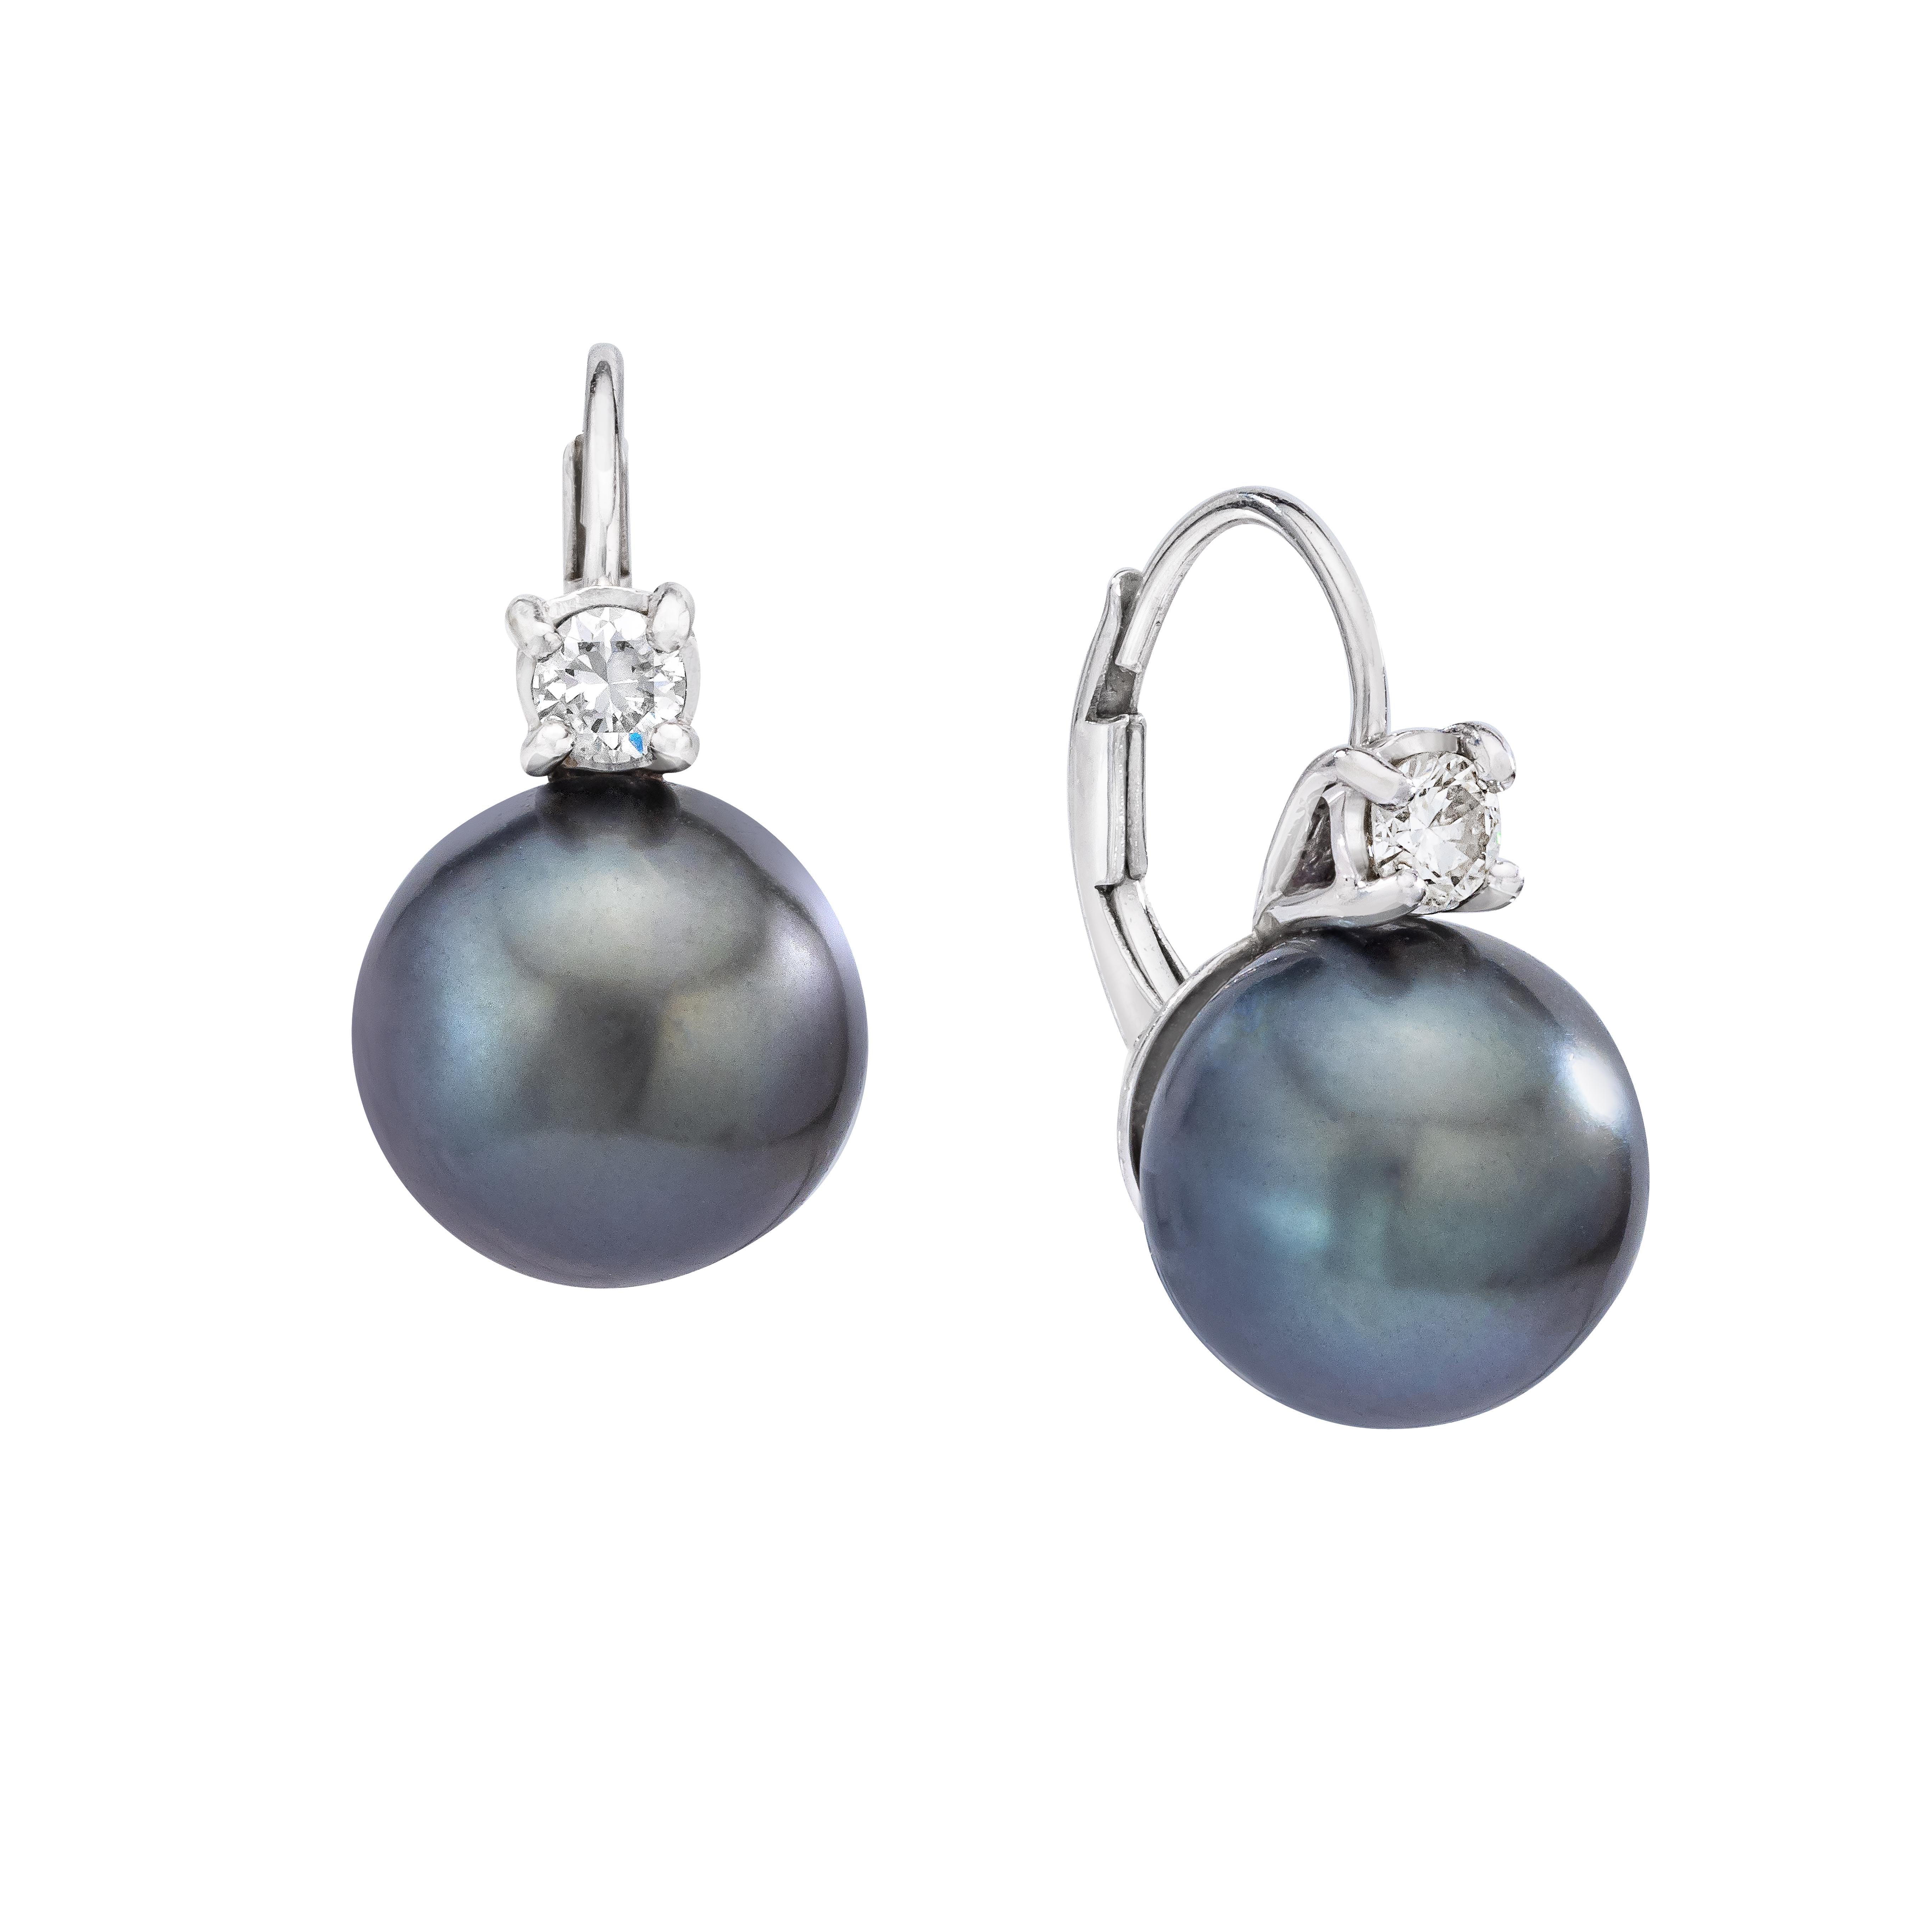 Beautiful and versatile Tahitian Pearl and Diamond lever back earrings.

Earring Details

(2) 9.8 - 10 mm Tahitian Pearl Earrings - Gray Overtone
(2) Round Brilliant Diamonds - Weighing approximately 0.20 Carats

Overall Weight:  4.2 grams

Overal